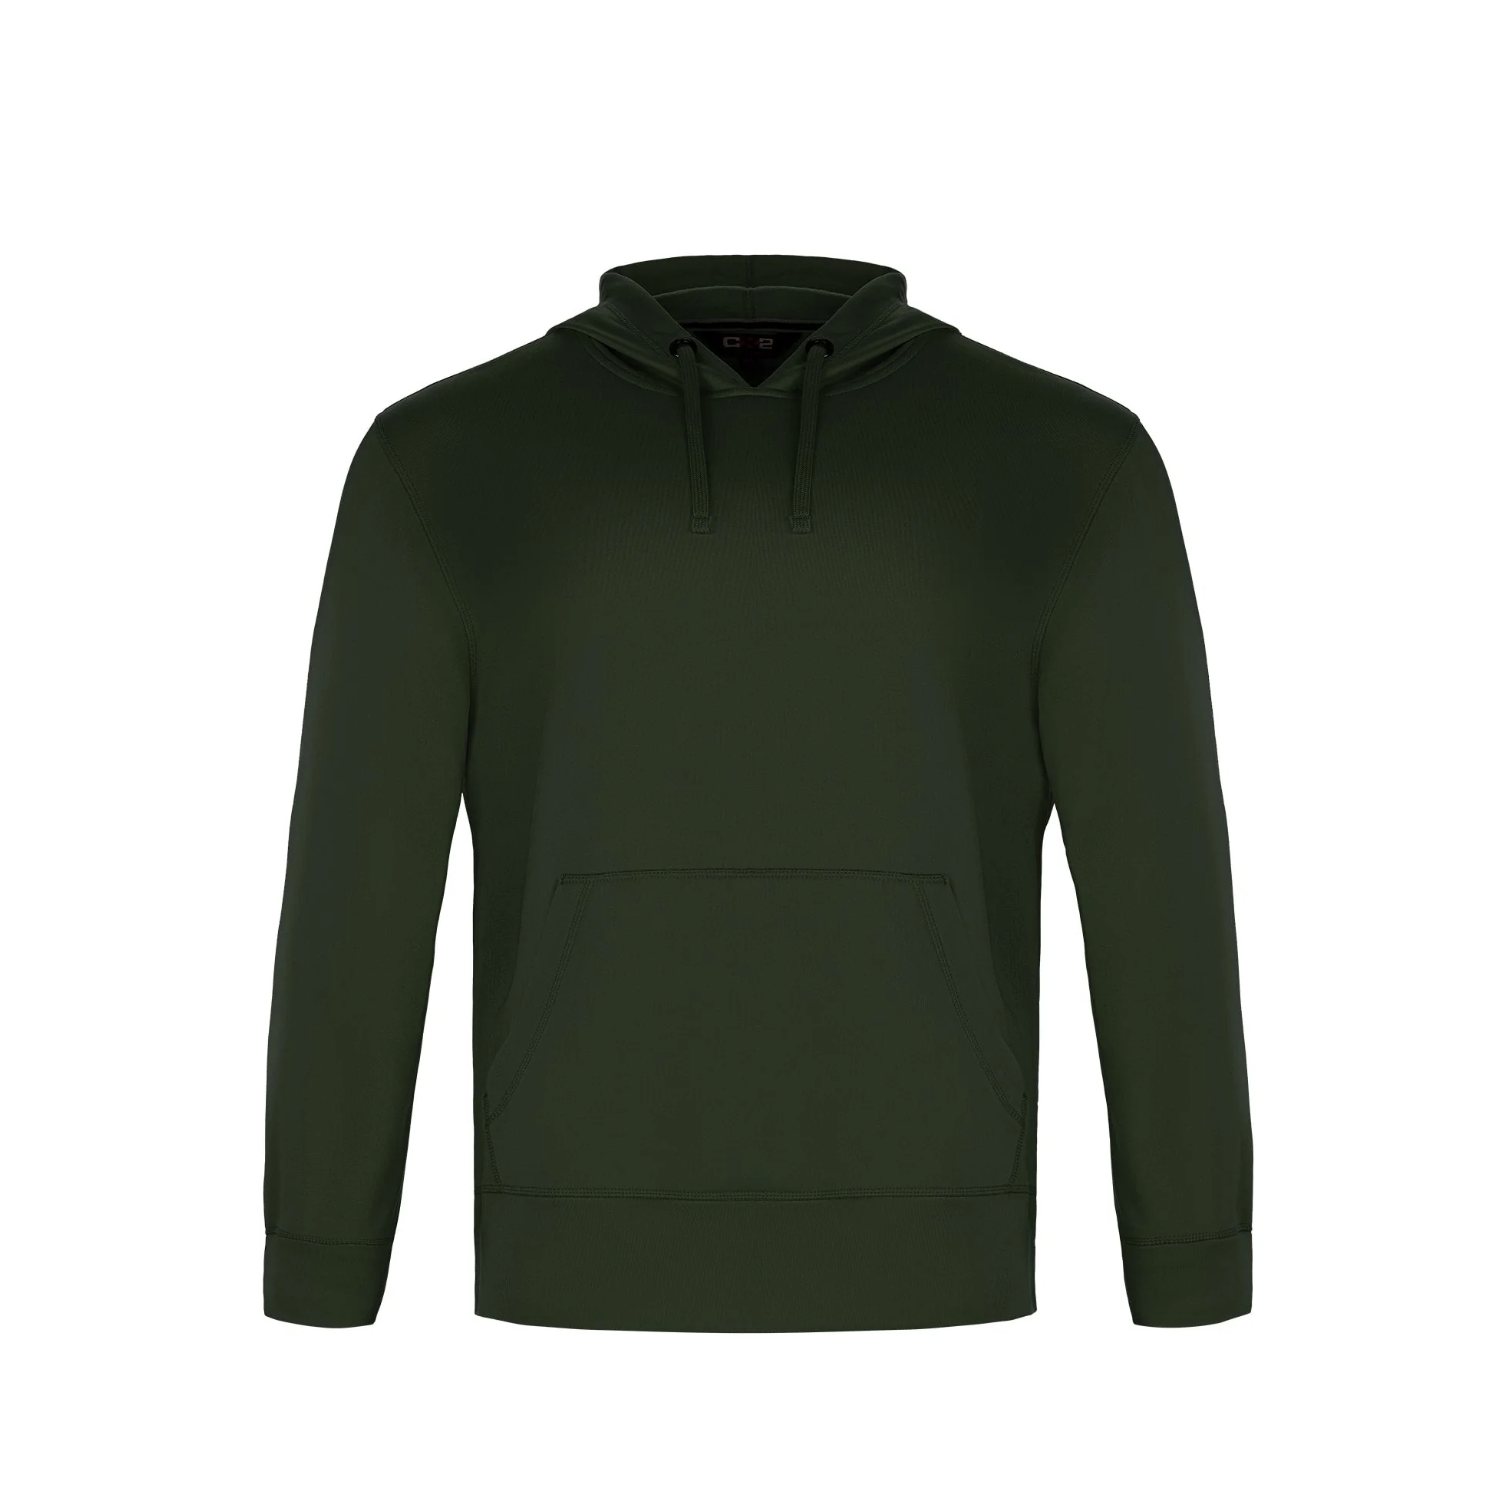 L00687 - Palm Aire - Men's Polyester Pullover Hoodie